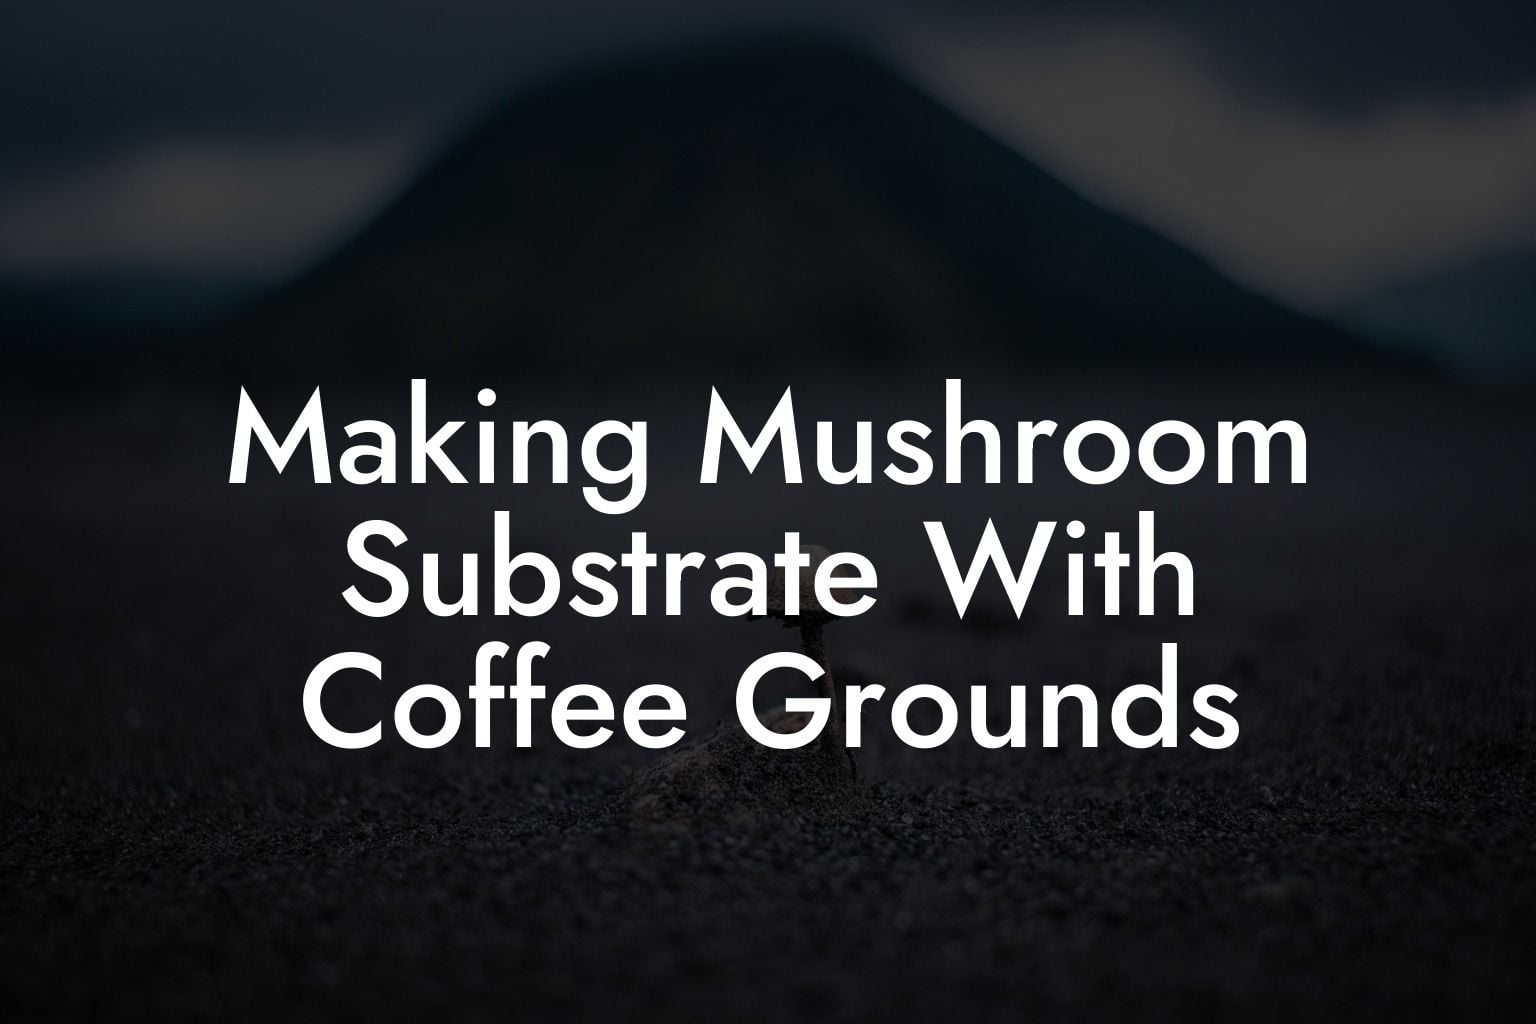 Making Mushroom Substrate With Coffee Grounds